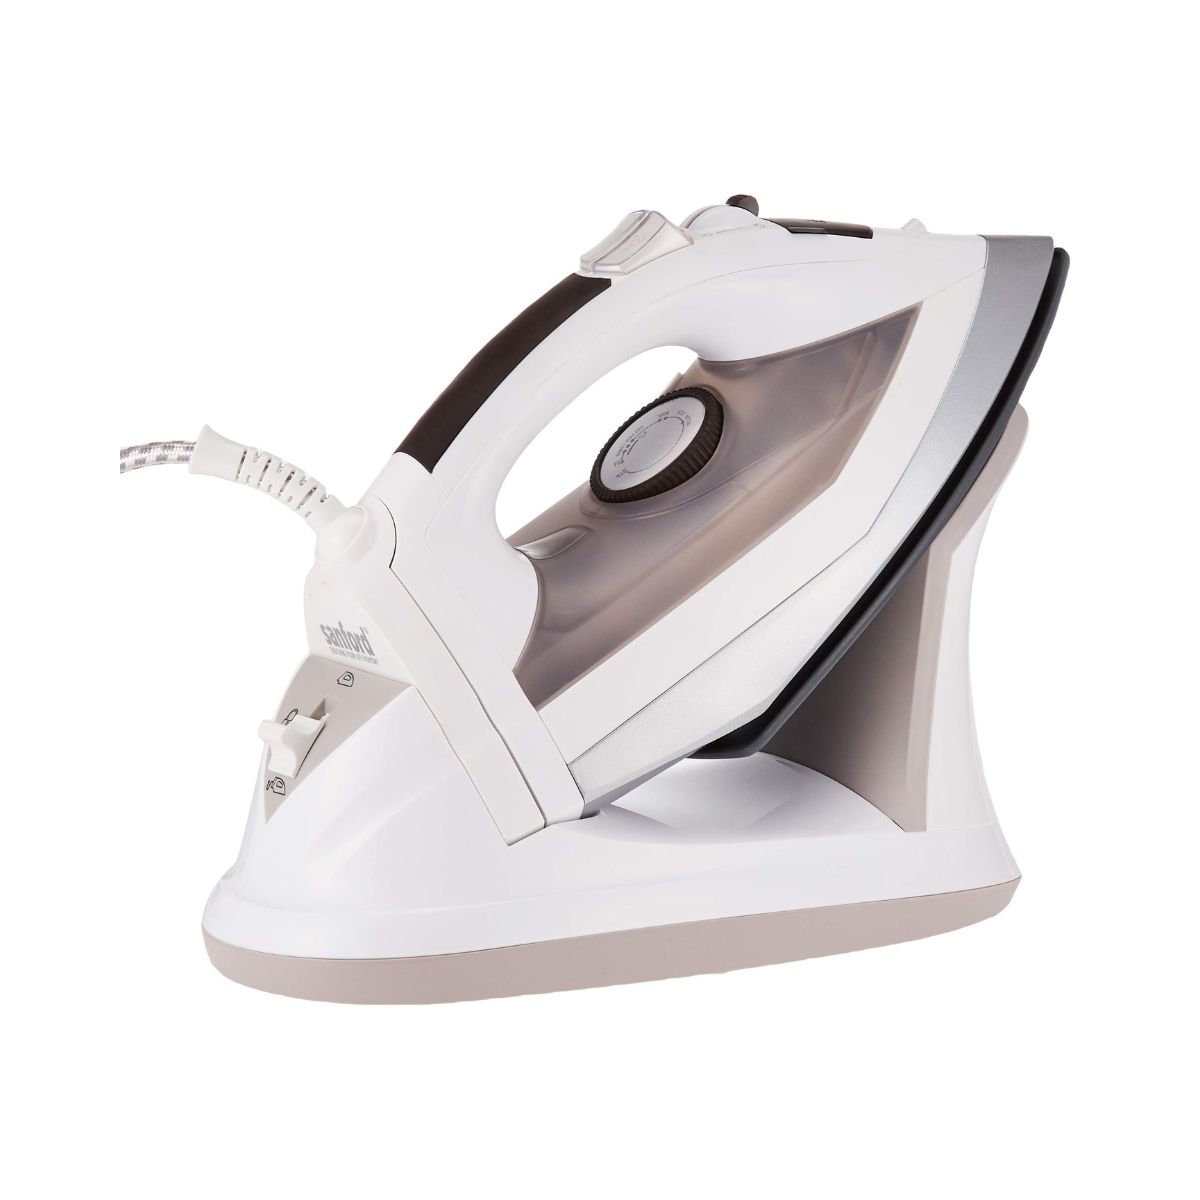 Sanford Steam Iron - Corded And Cordless - SF68SI - White